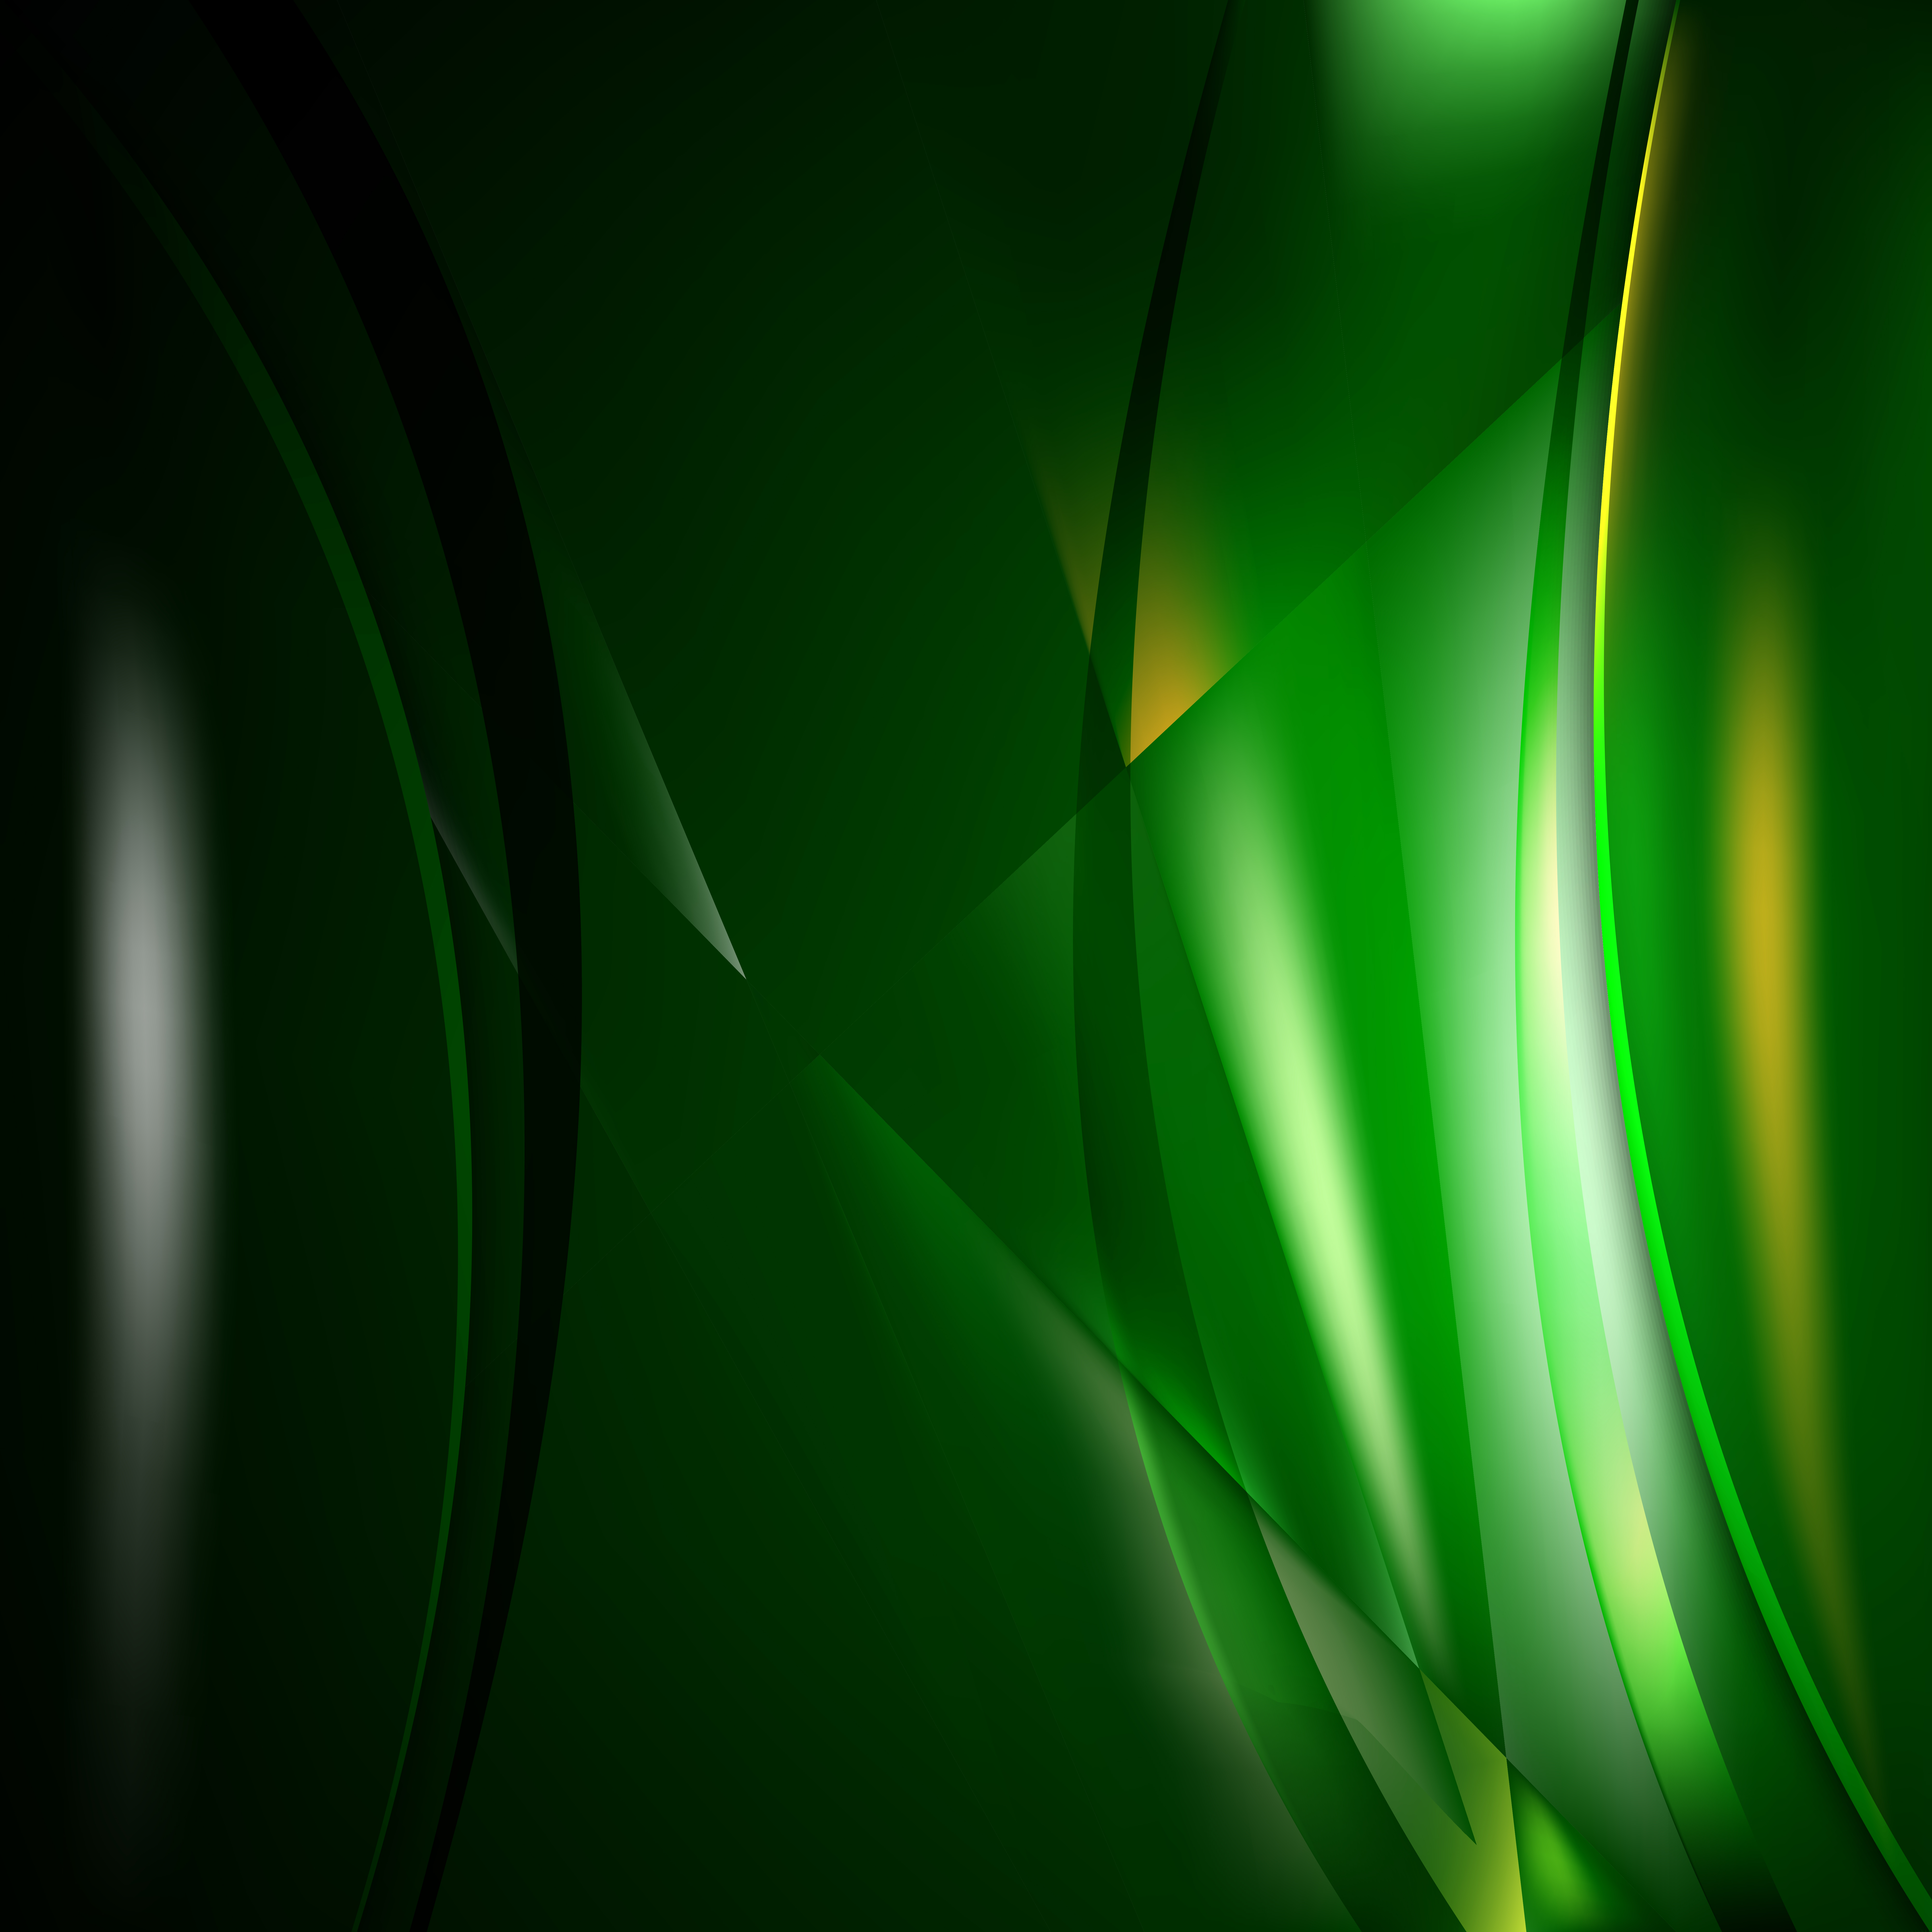 Free Abstract Green and Black Background Vector Illustration